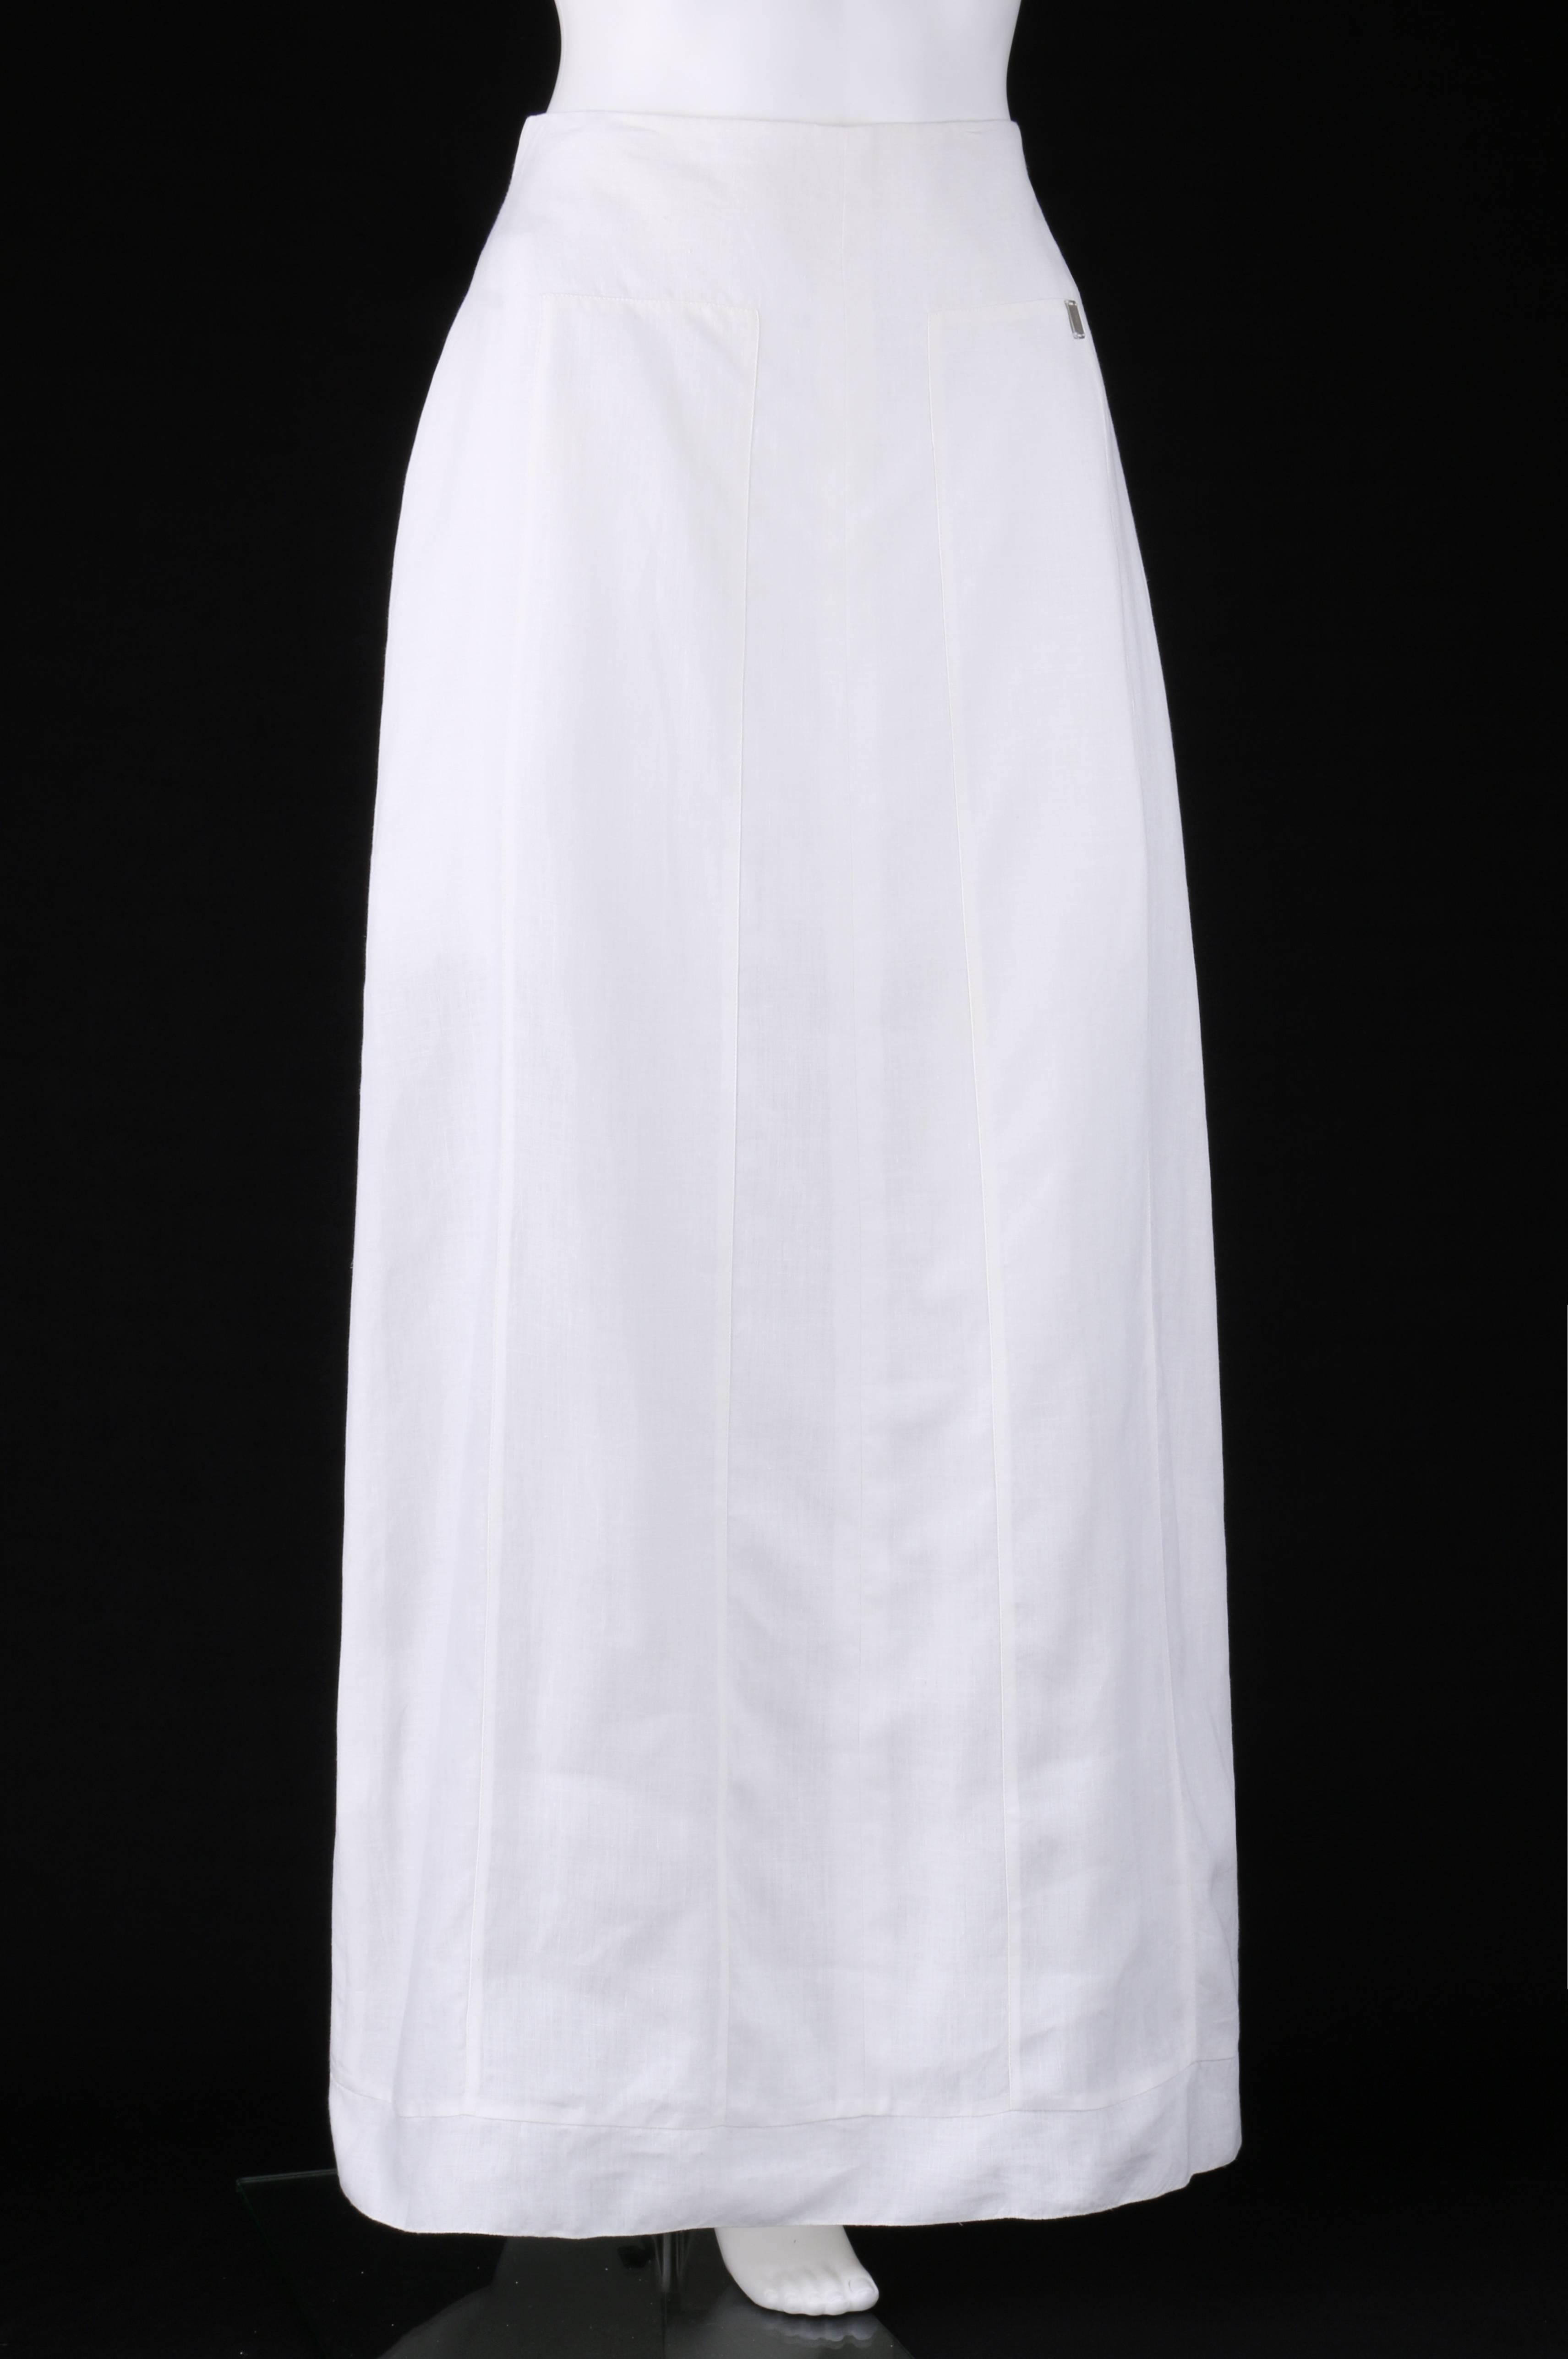 Chanel Spring/Summer 1999 white linen floor length classic maxi skirt; New with tags. Designed by Karl Lagerfeld. Floor length. Maxi style. High waisted. Two inset oblong panels at front and back from hips to hem. 